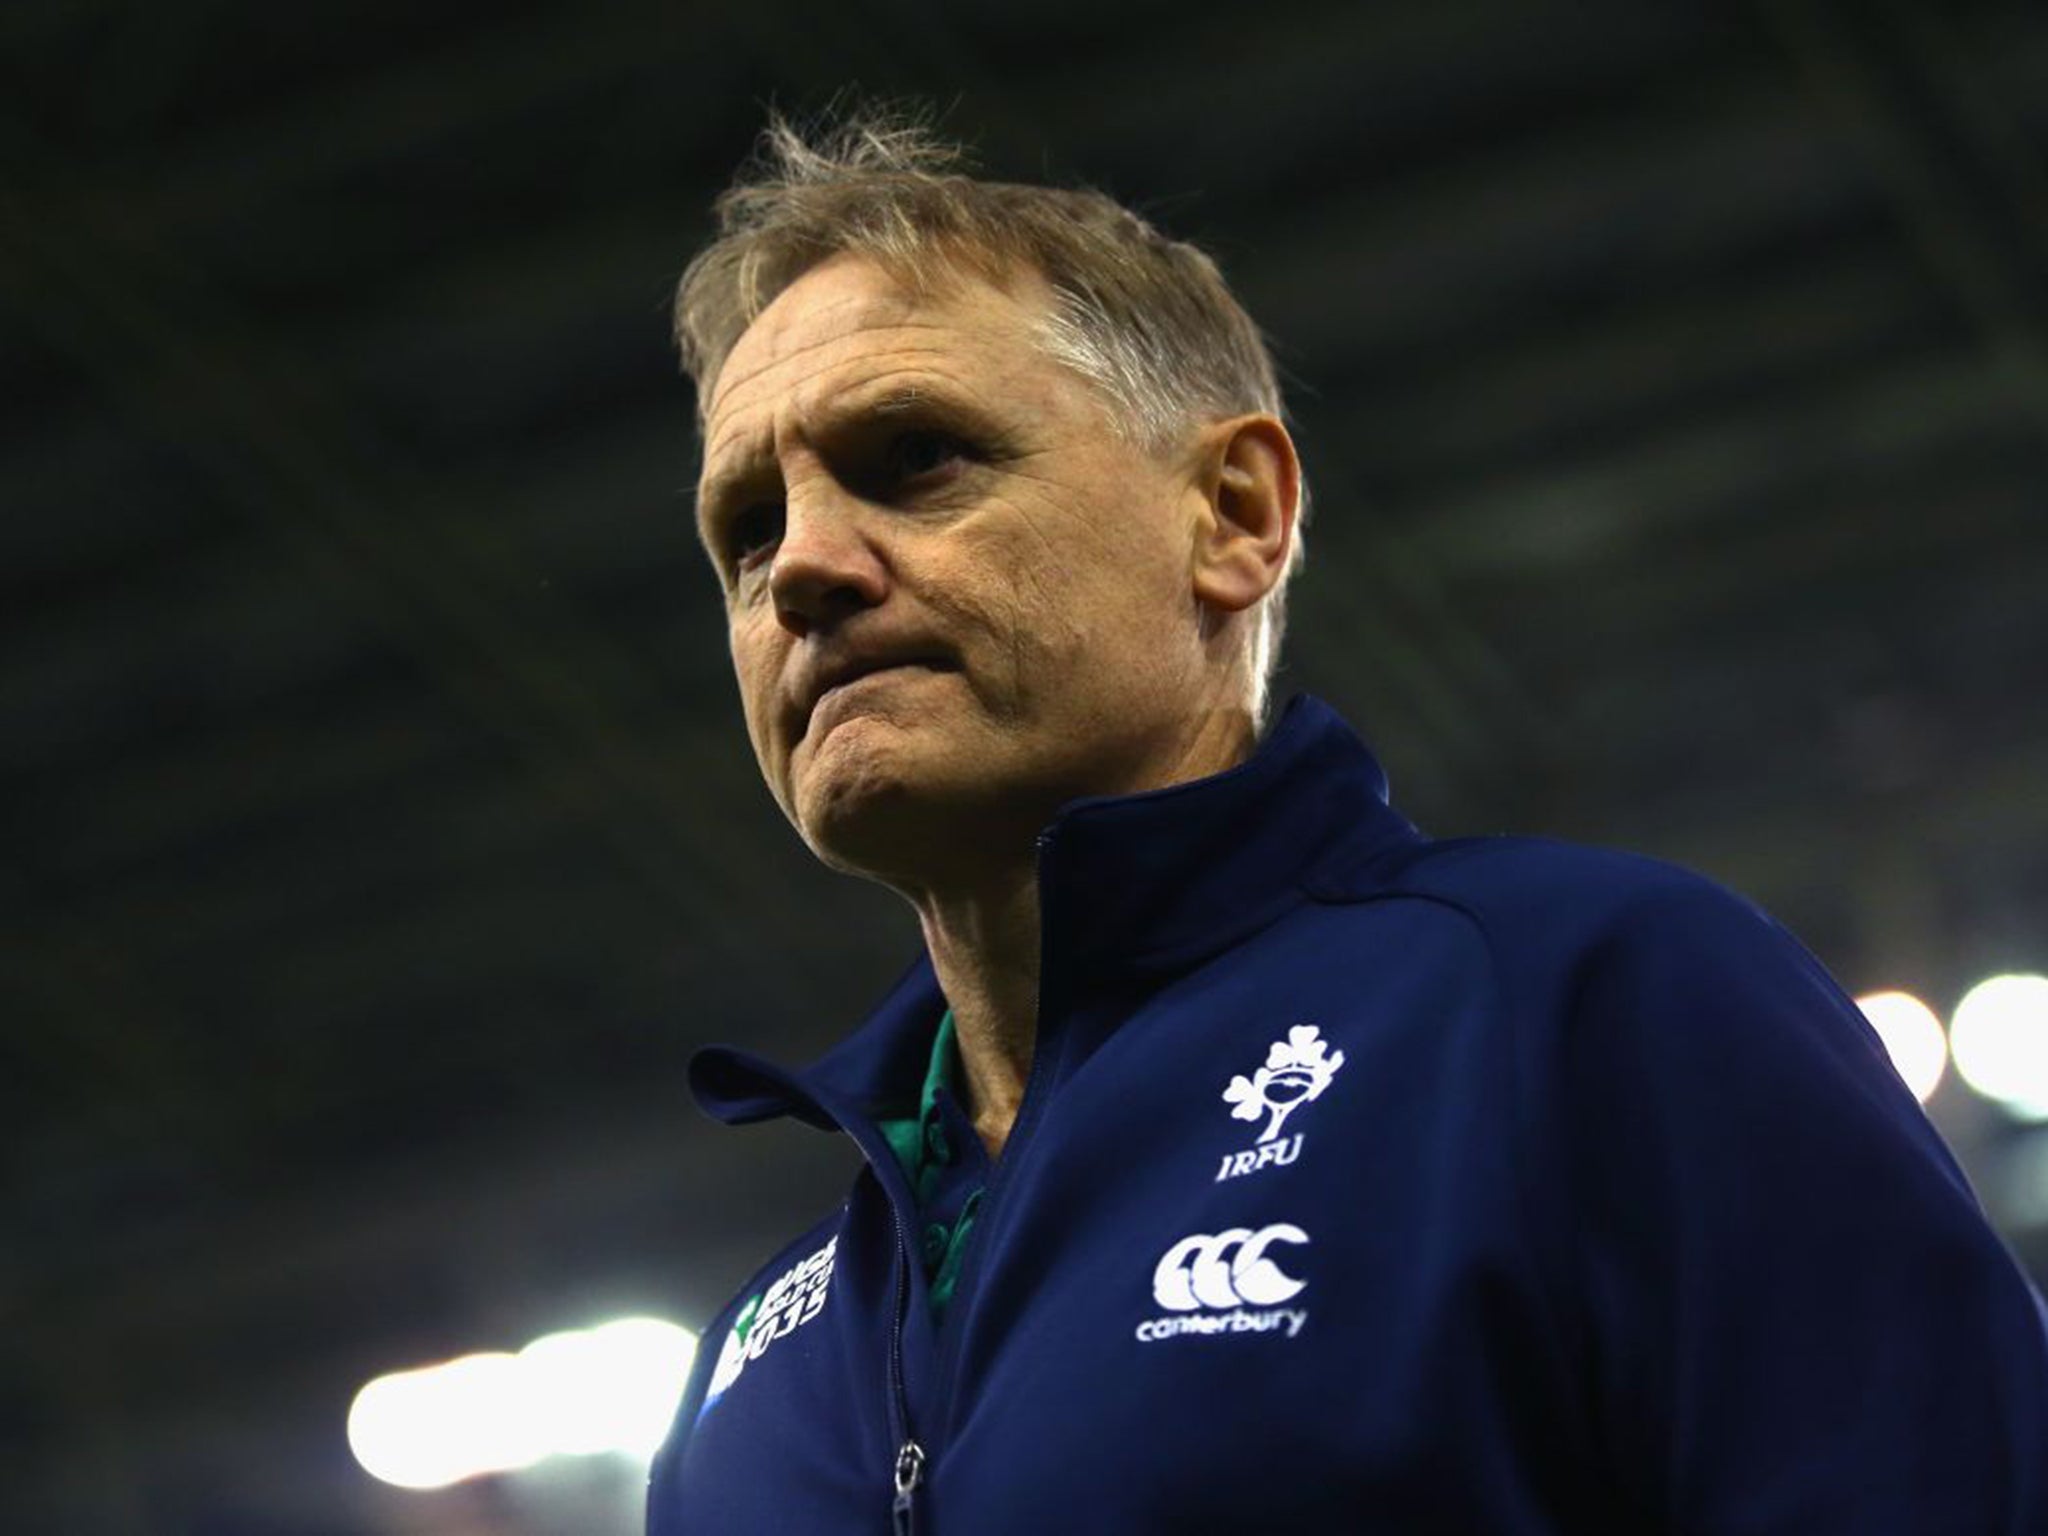 Joe Schmidt (NZ) Head coach, Ireland, 50, contracted until 2017. Tactical master and proven winner, the former Leinster and Clermont coach has an amiable public face, yet is strong enough to withstand gripes in Ireland that he dislikes mavericks